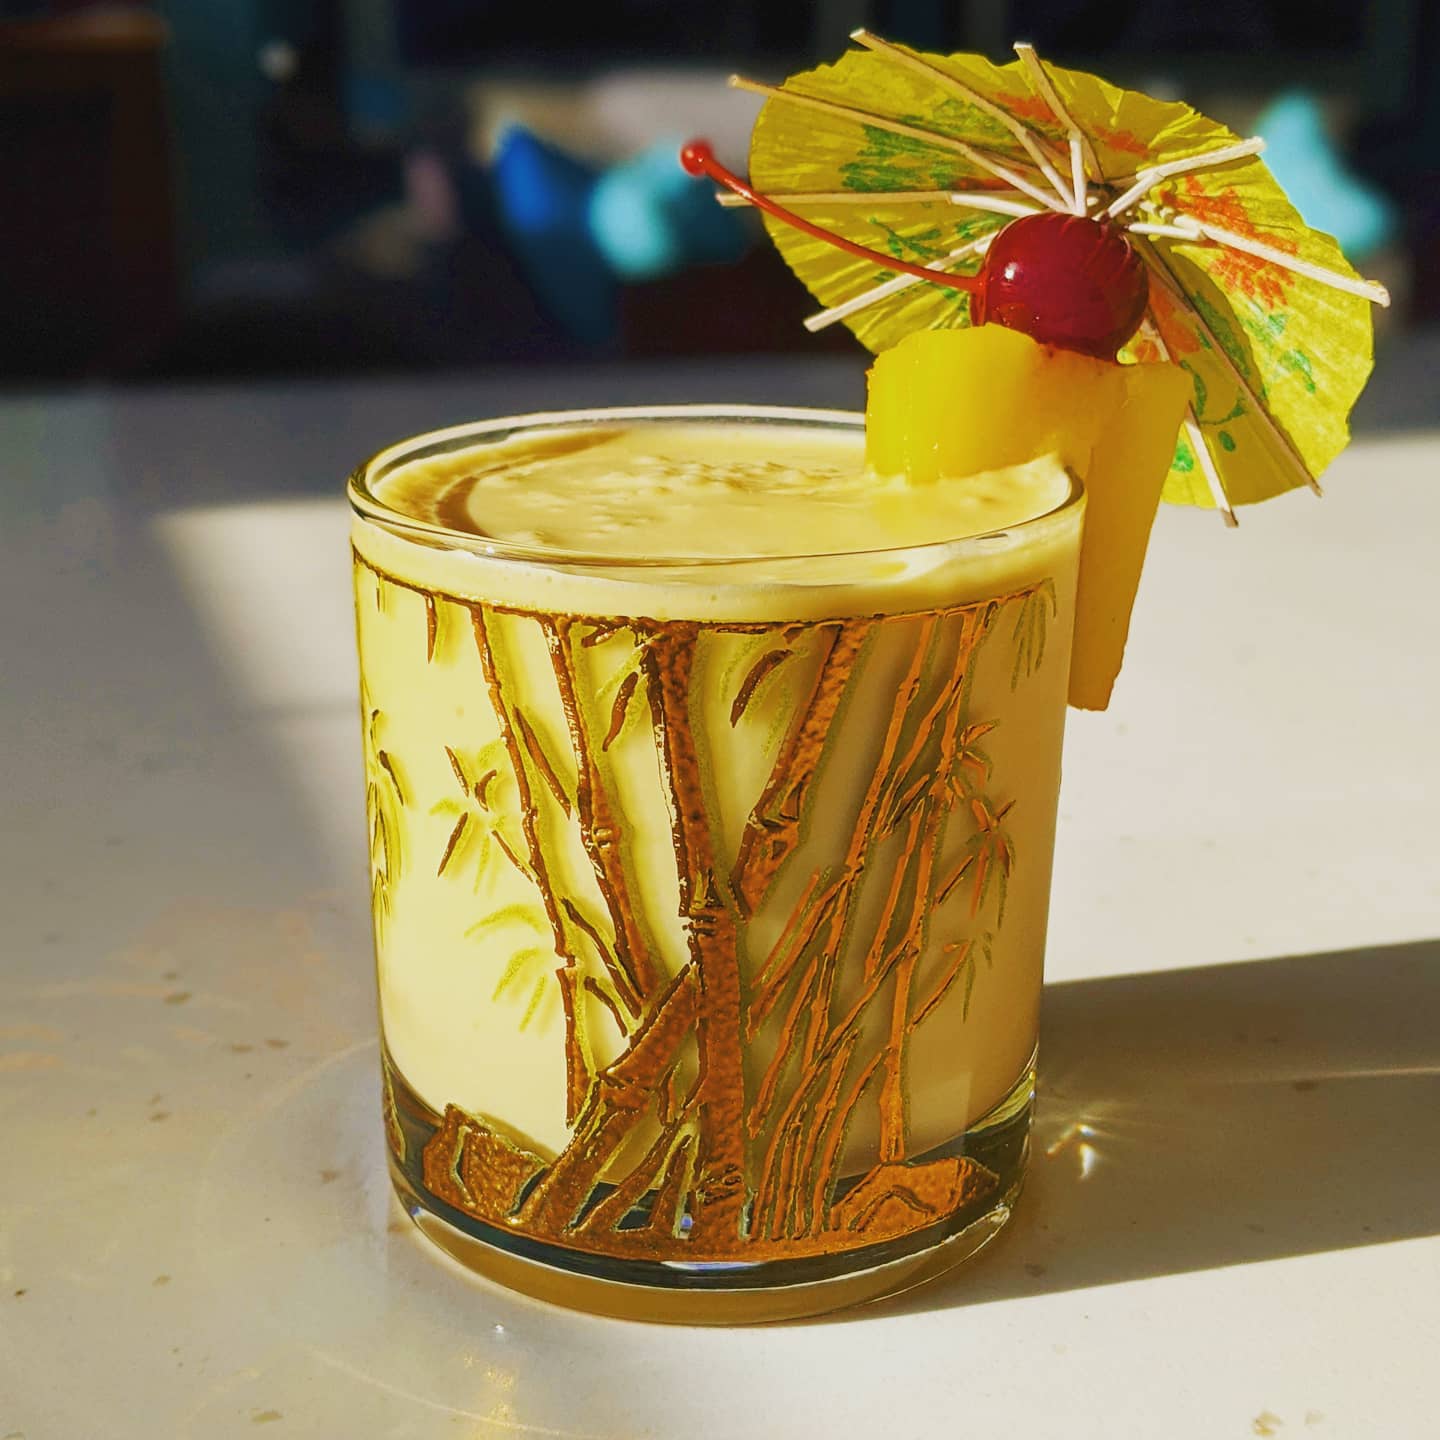 3 Ingredient Spiced Piña Colada Recipe Cheers Mr Forbes